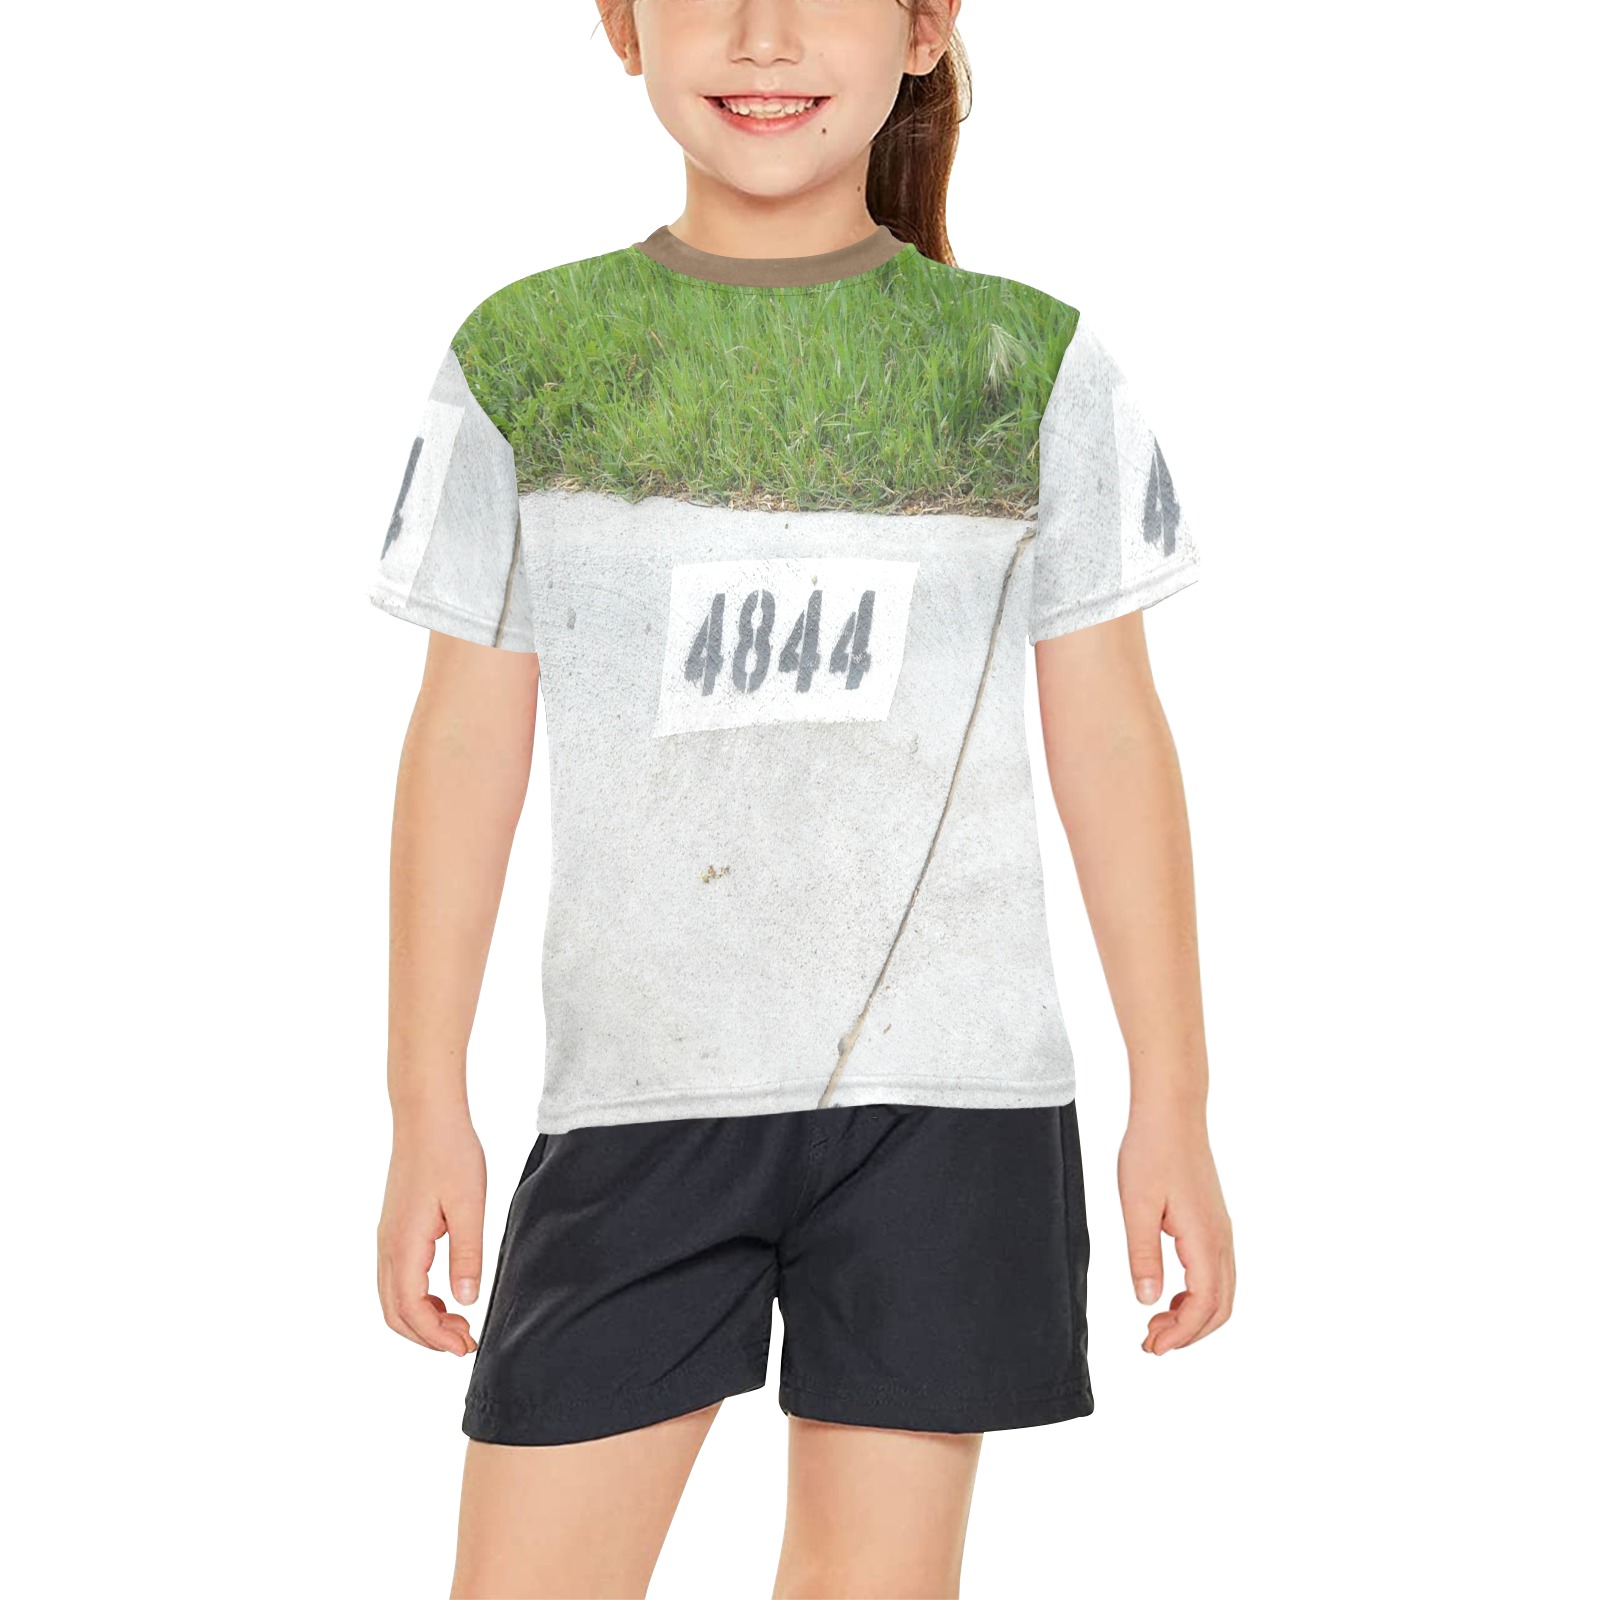 Street Number 4844 with brown collar Big Girls' All Over Print Crew Neck T-Shirt (Model T40-2)